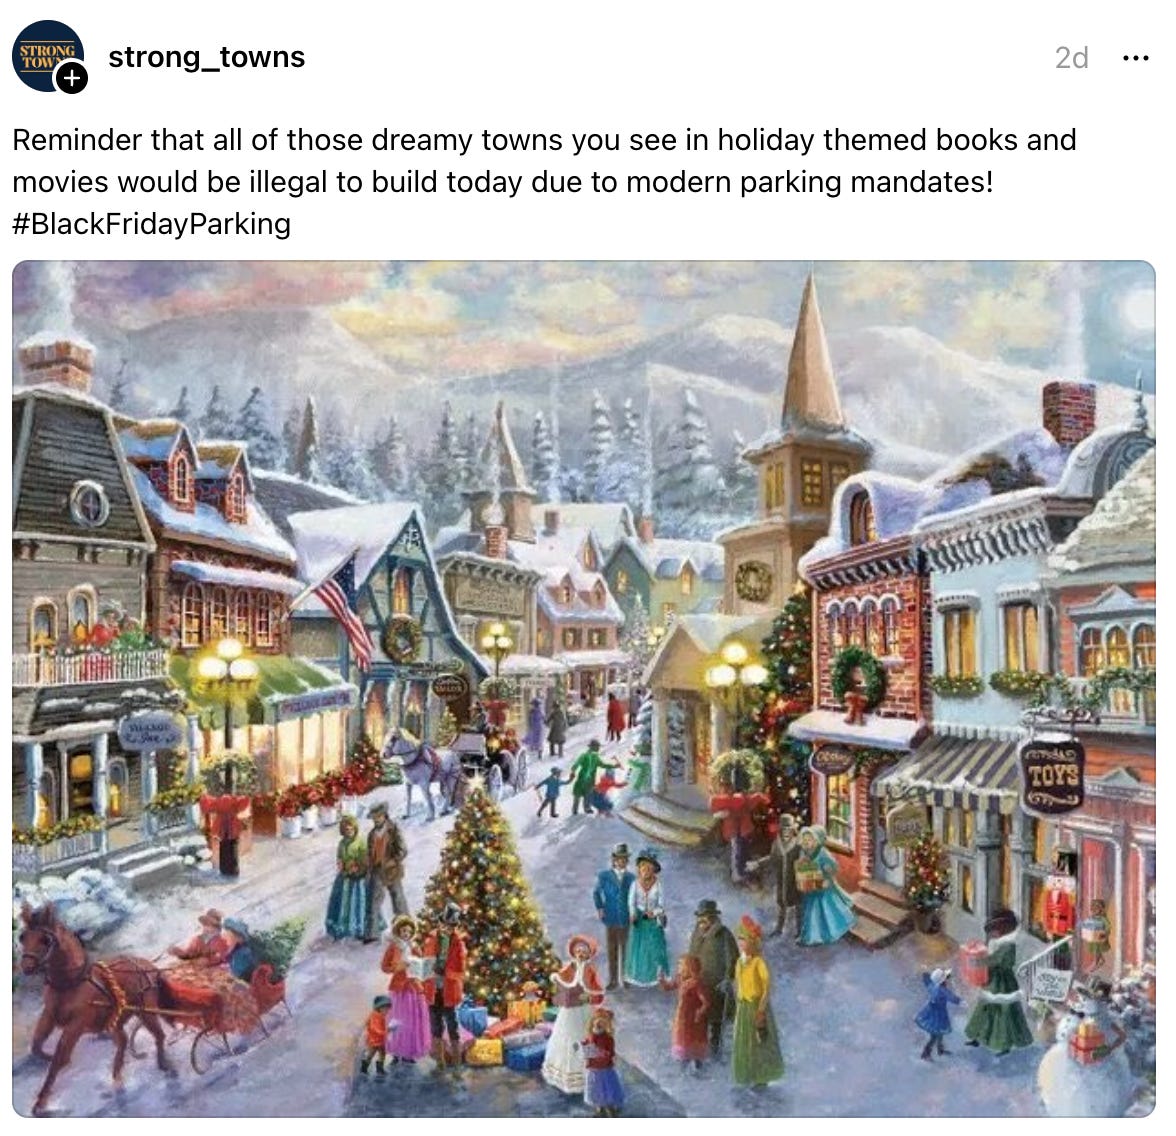  strong_towns 2d Reminder that all of those dreamy towns you see in holiday themed books and movies would be illegal to build today due to modern parking mandates! #BlackFridayParking